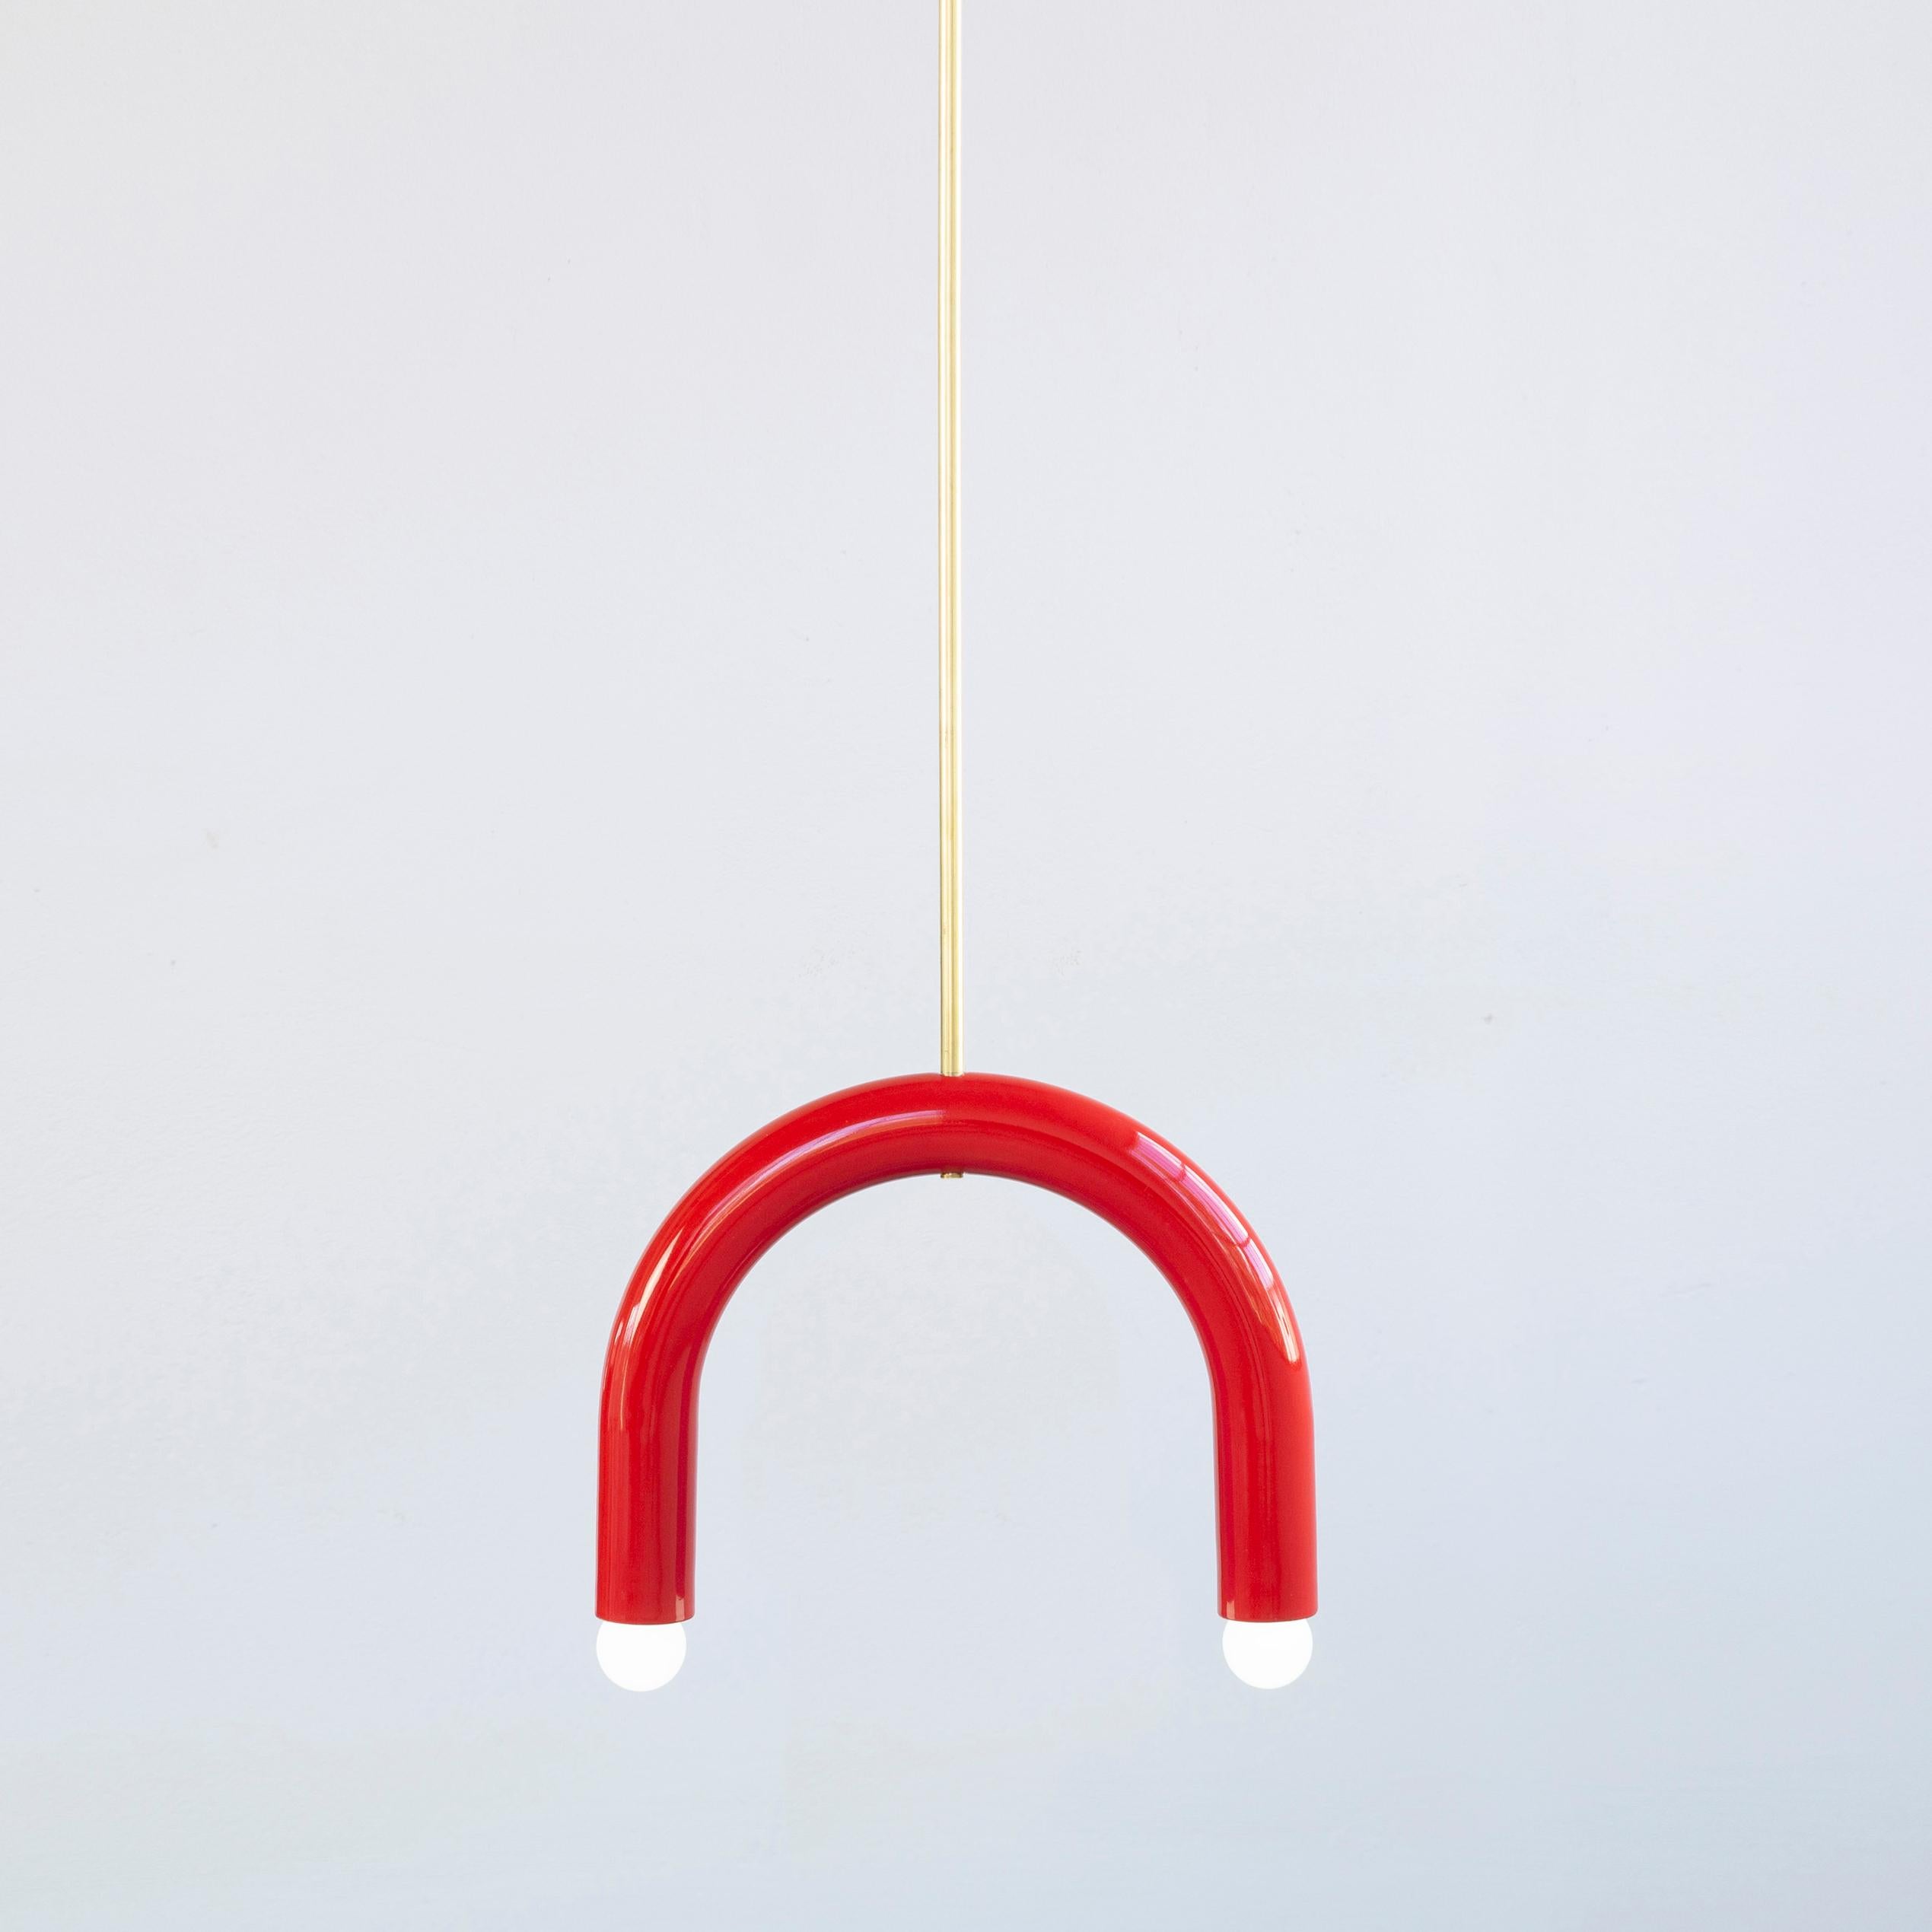 Red TRN B1 pendant lamp by Pani Jurek
Dimensions: D 5 x W 35 x H 28 cm 
Material: Hand glazed ceramic and brass.
Available in other colors.
Lamps from the TRN collection hang on a metal tube, not on a cable. This allows the lamp to be mounted in a